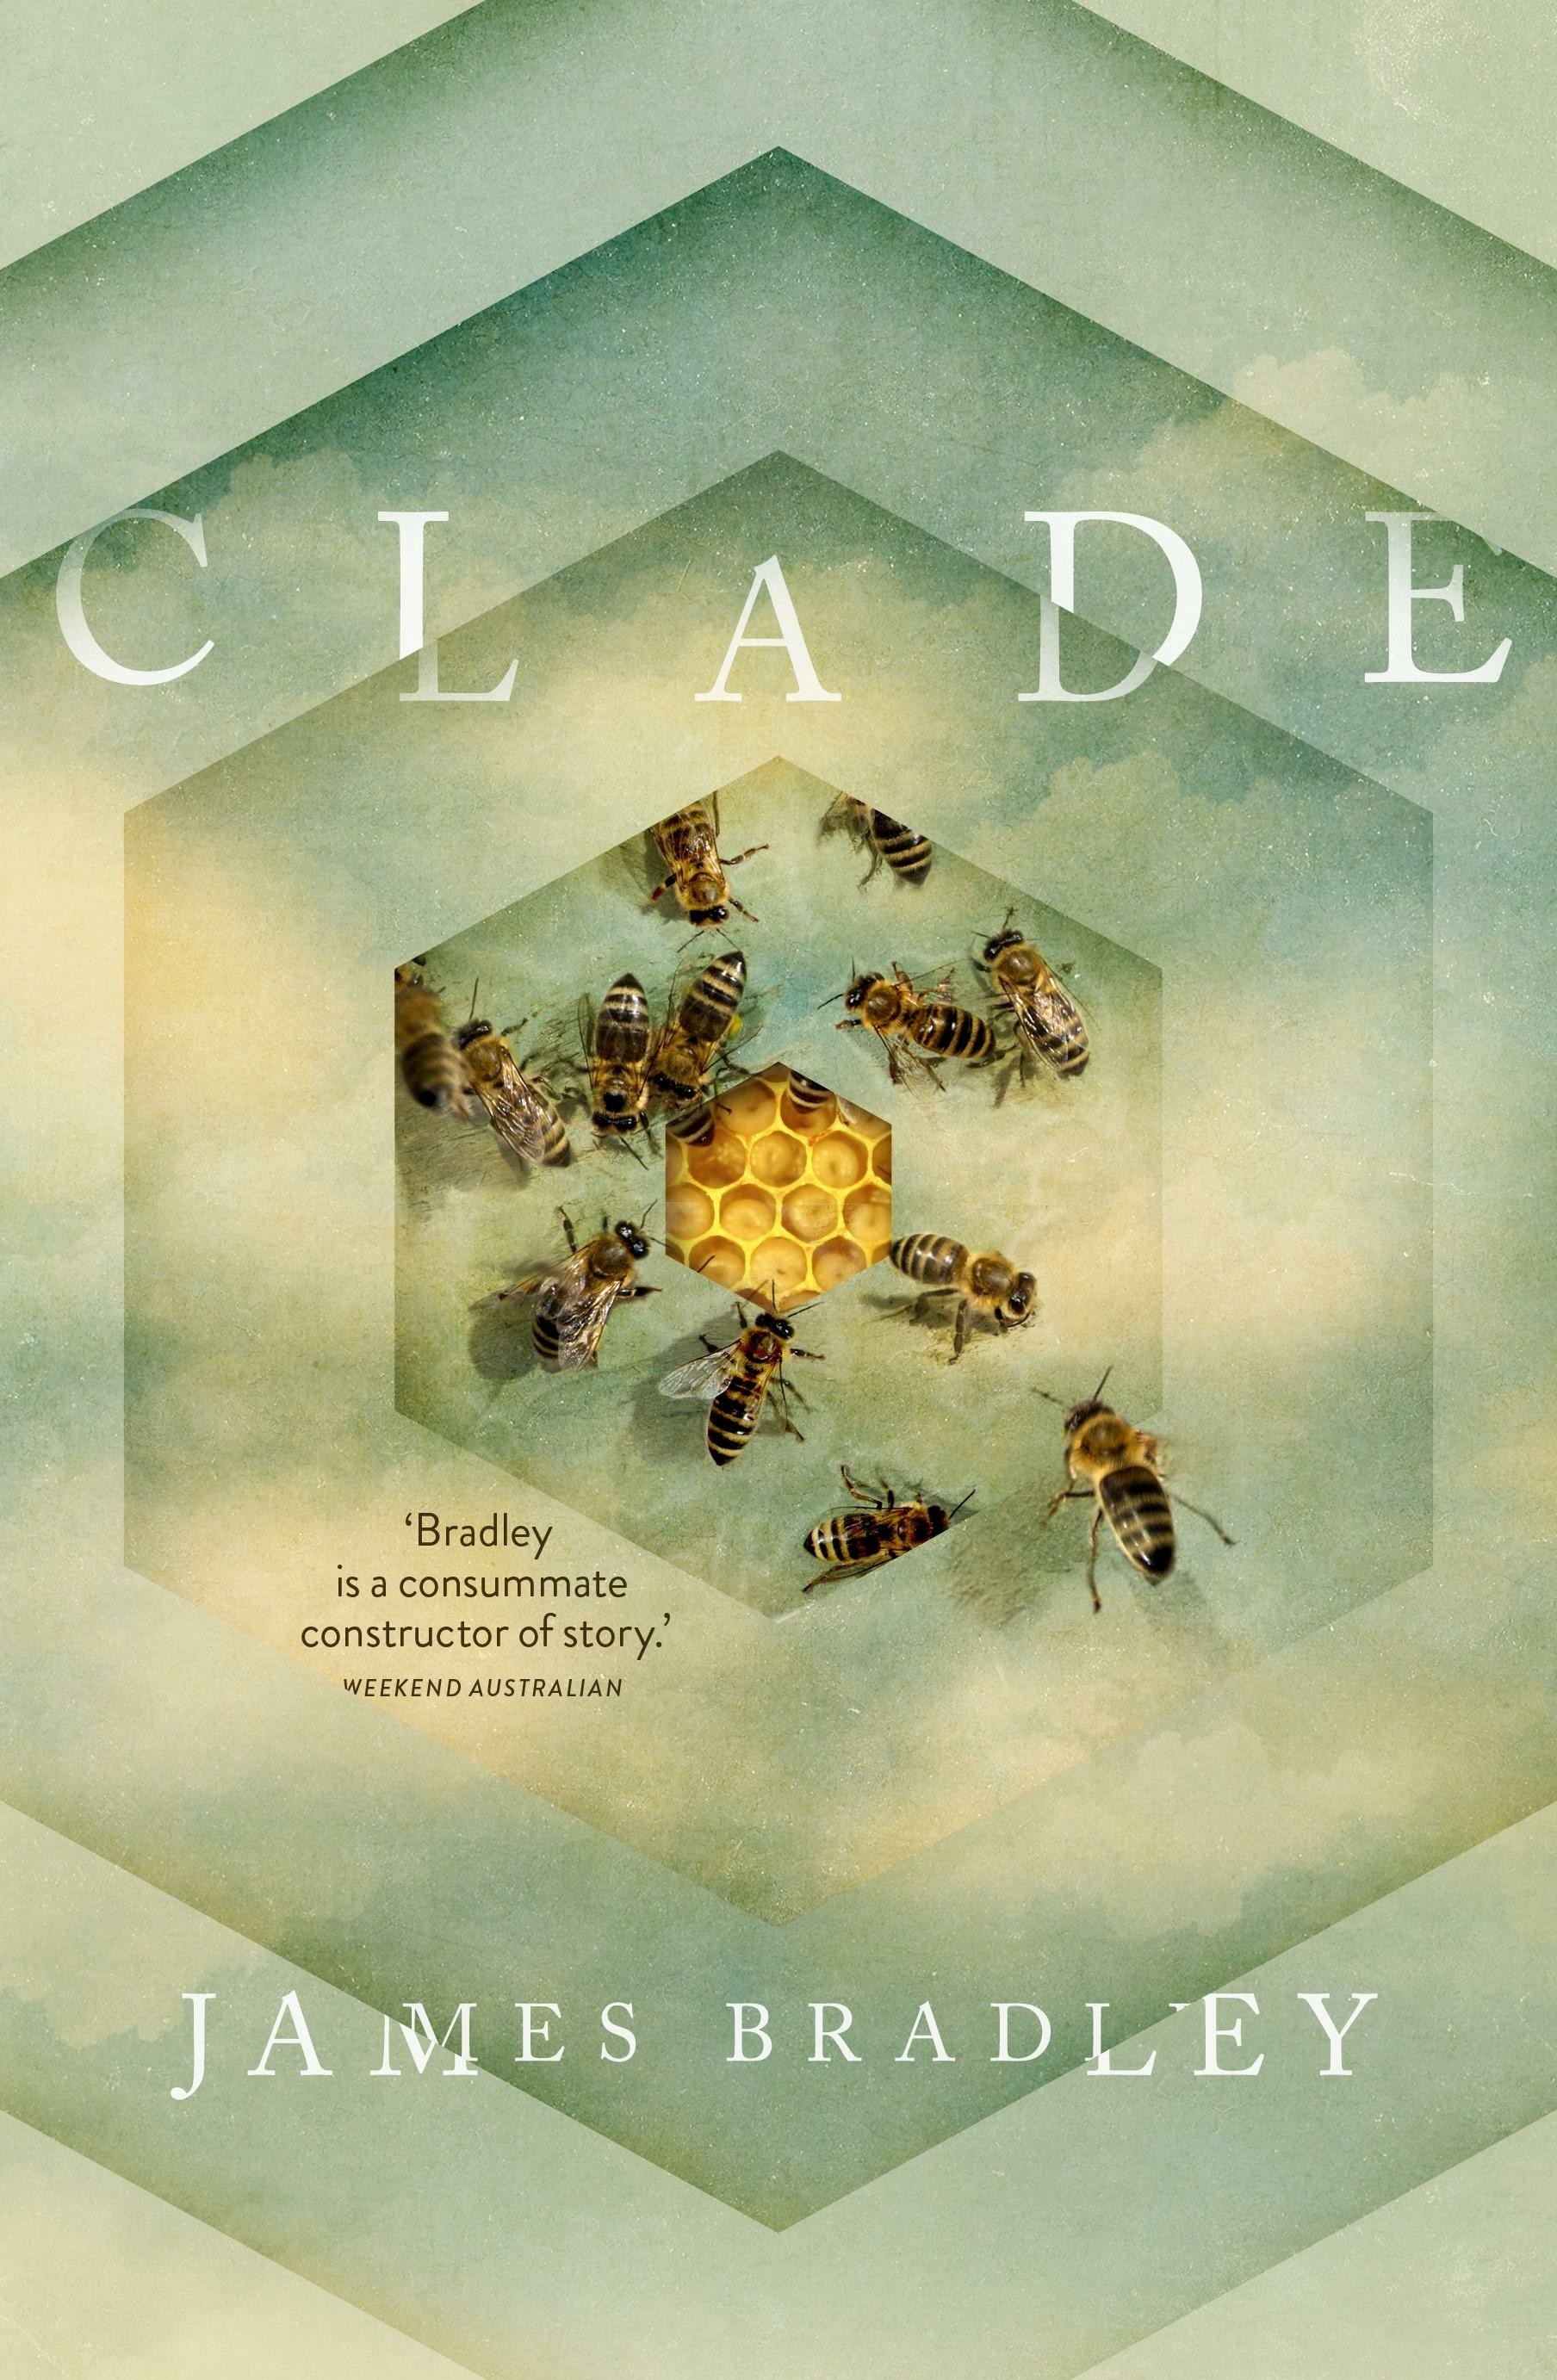 The front cover of James Bradley's "Clade", which shows bees surrounding a honeycomb.